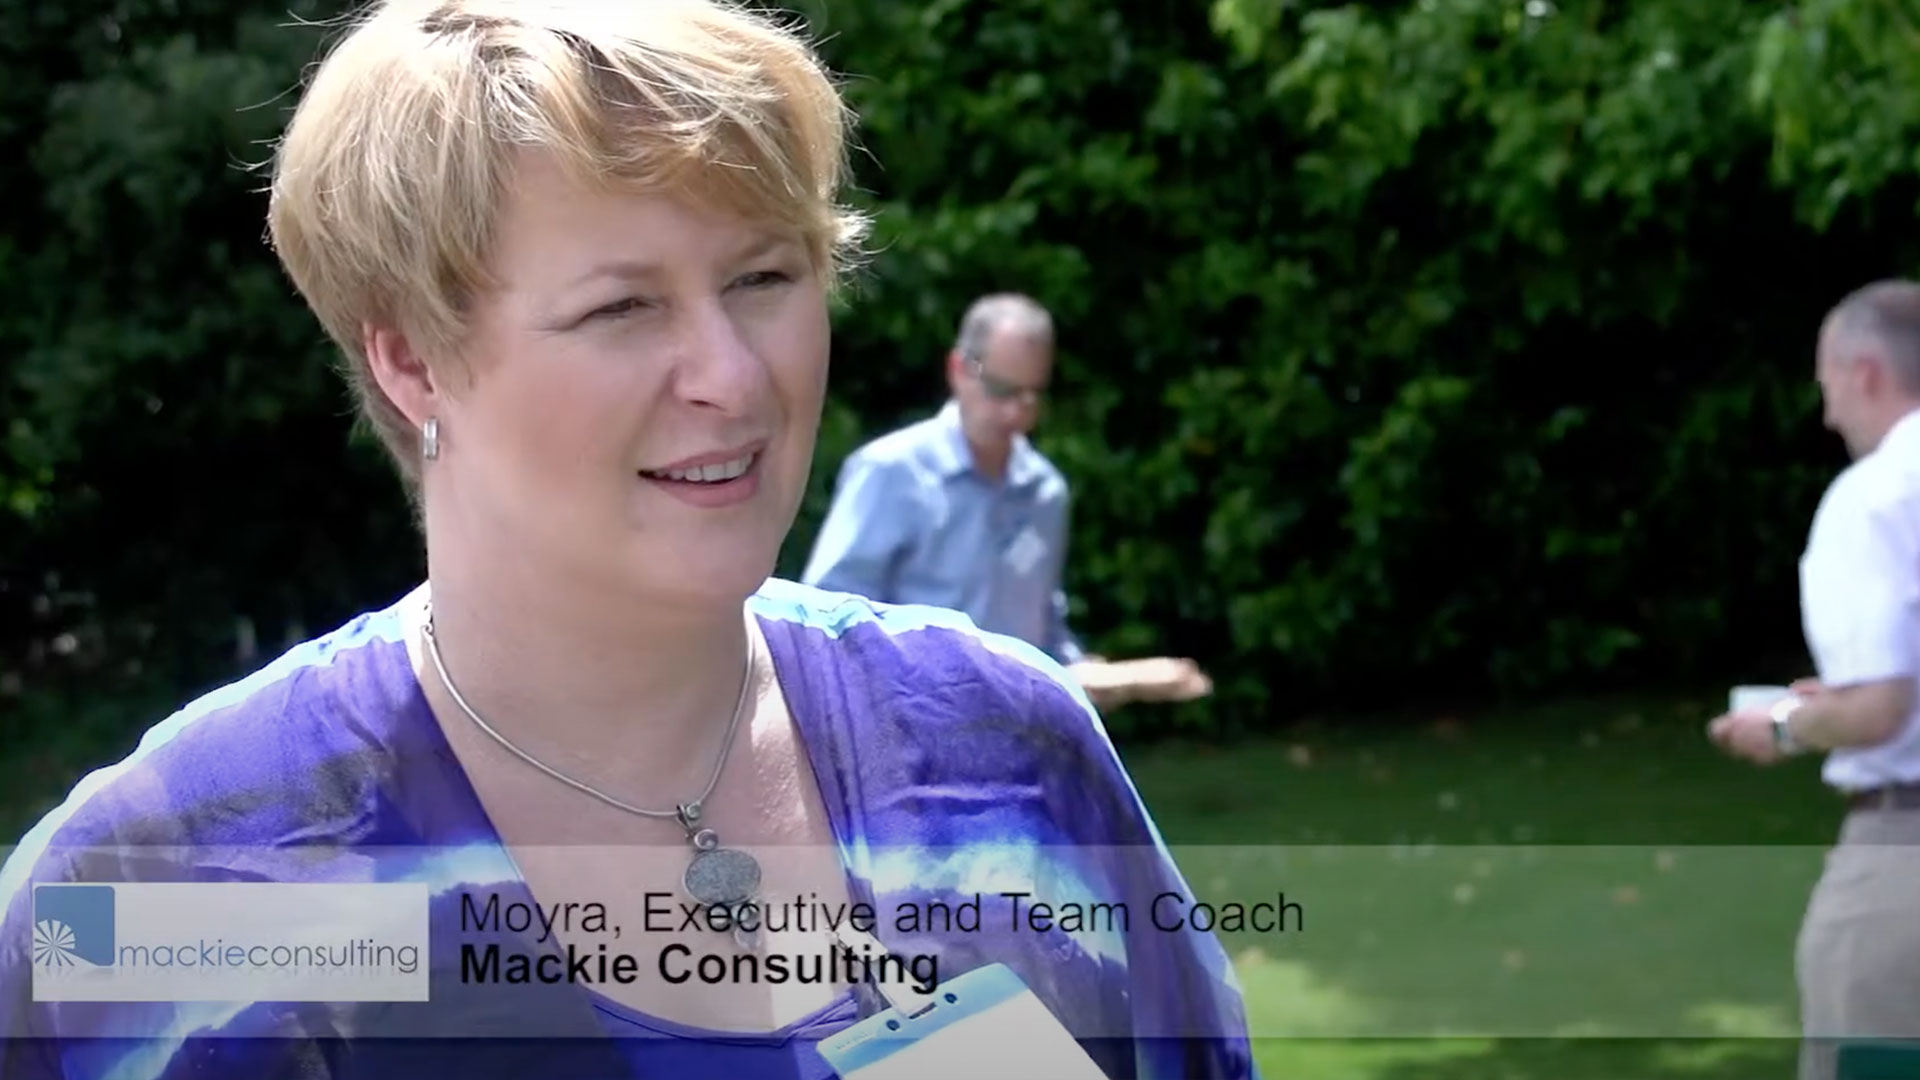 Testimonials for Accountants in Hertfordshire Mackie Consulting